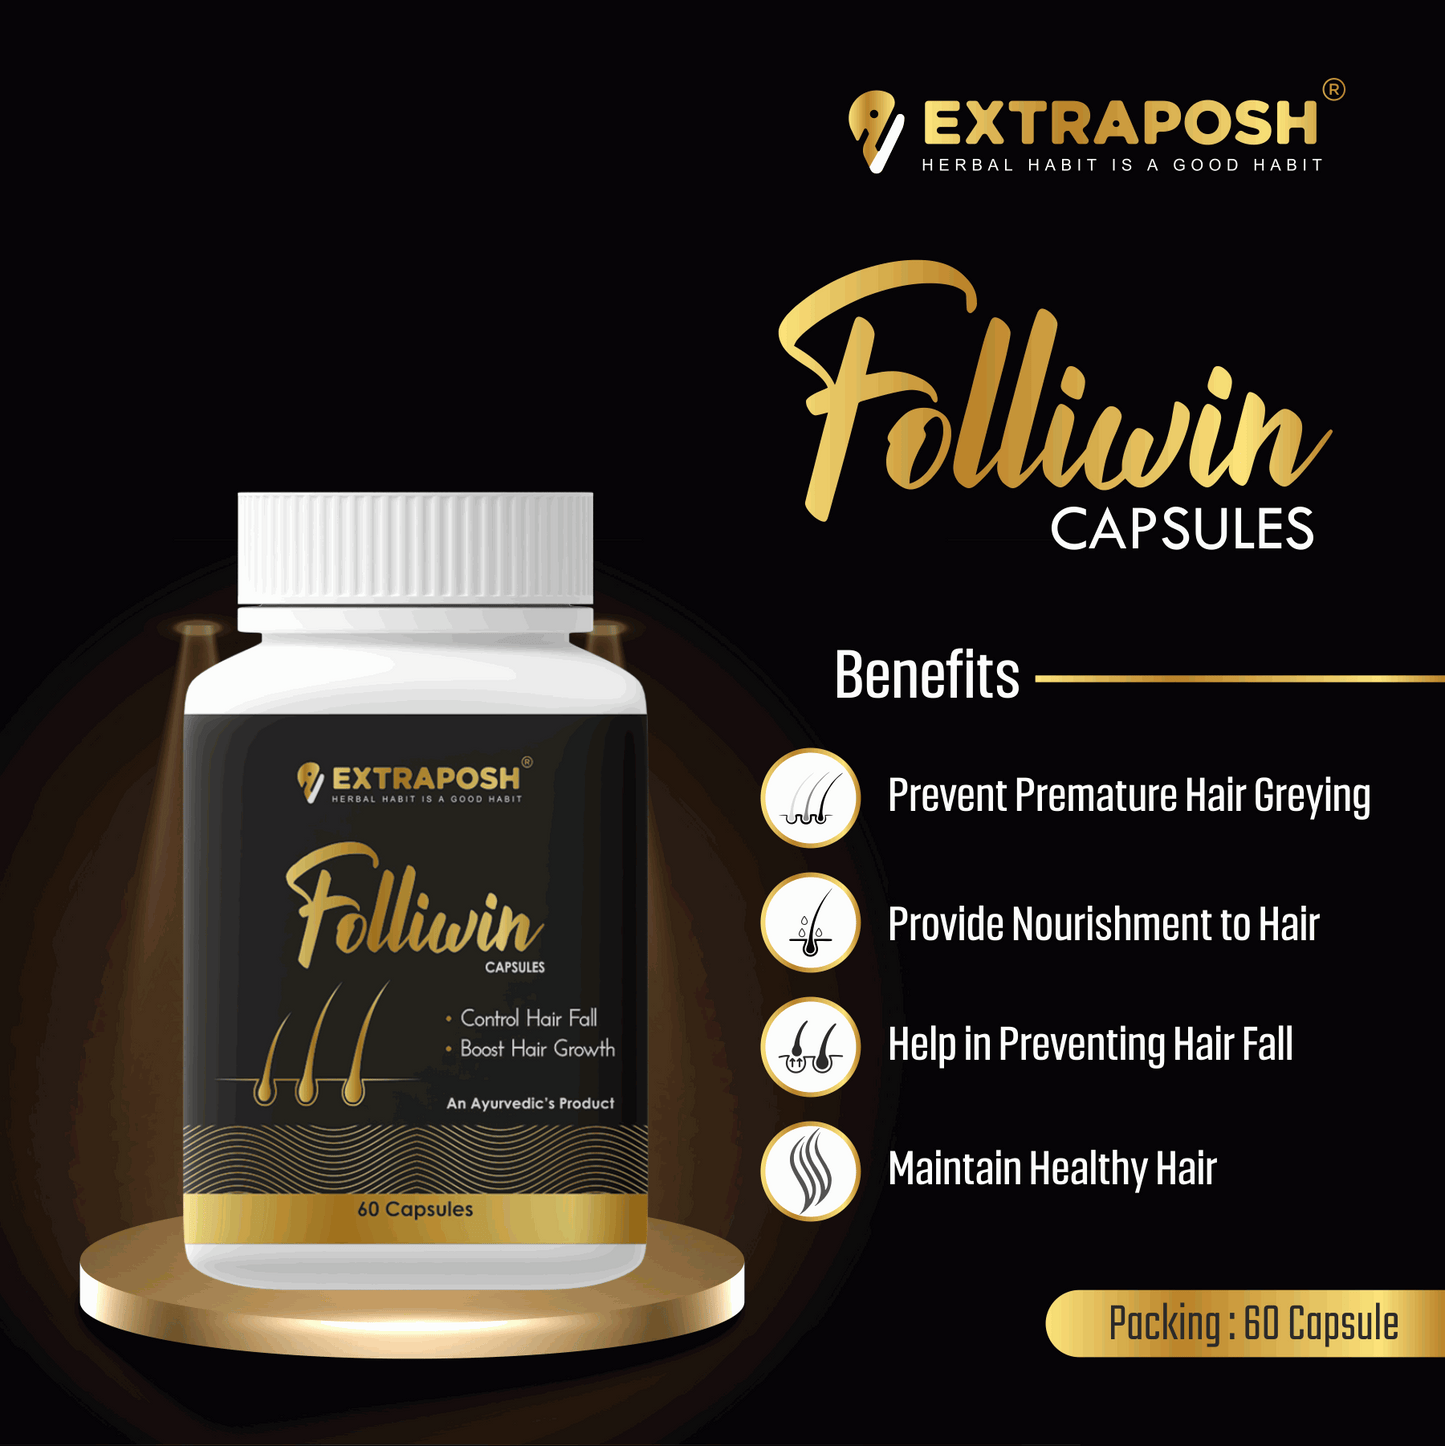 Folliwin capsules give benefits in premature hair greying provide nourishment to hair maintain healthy hair